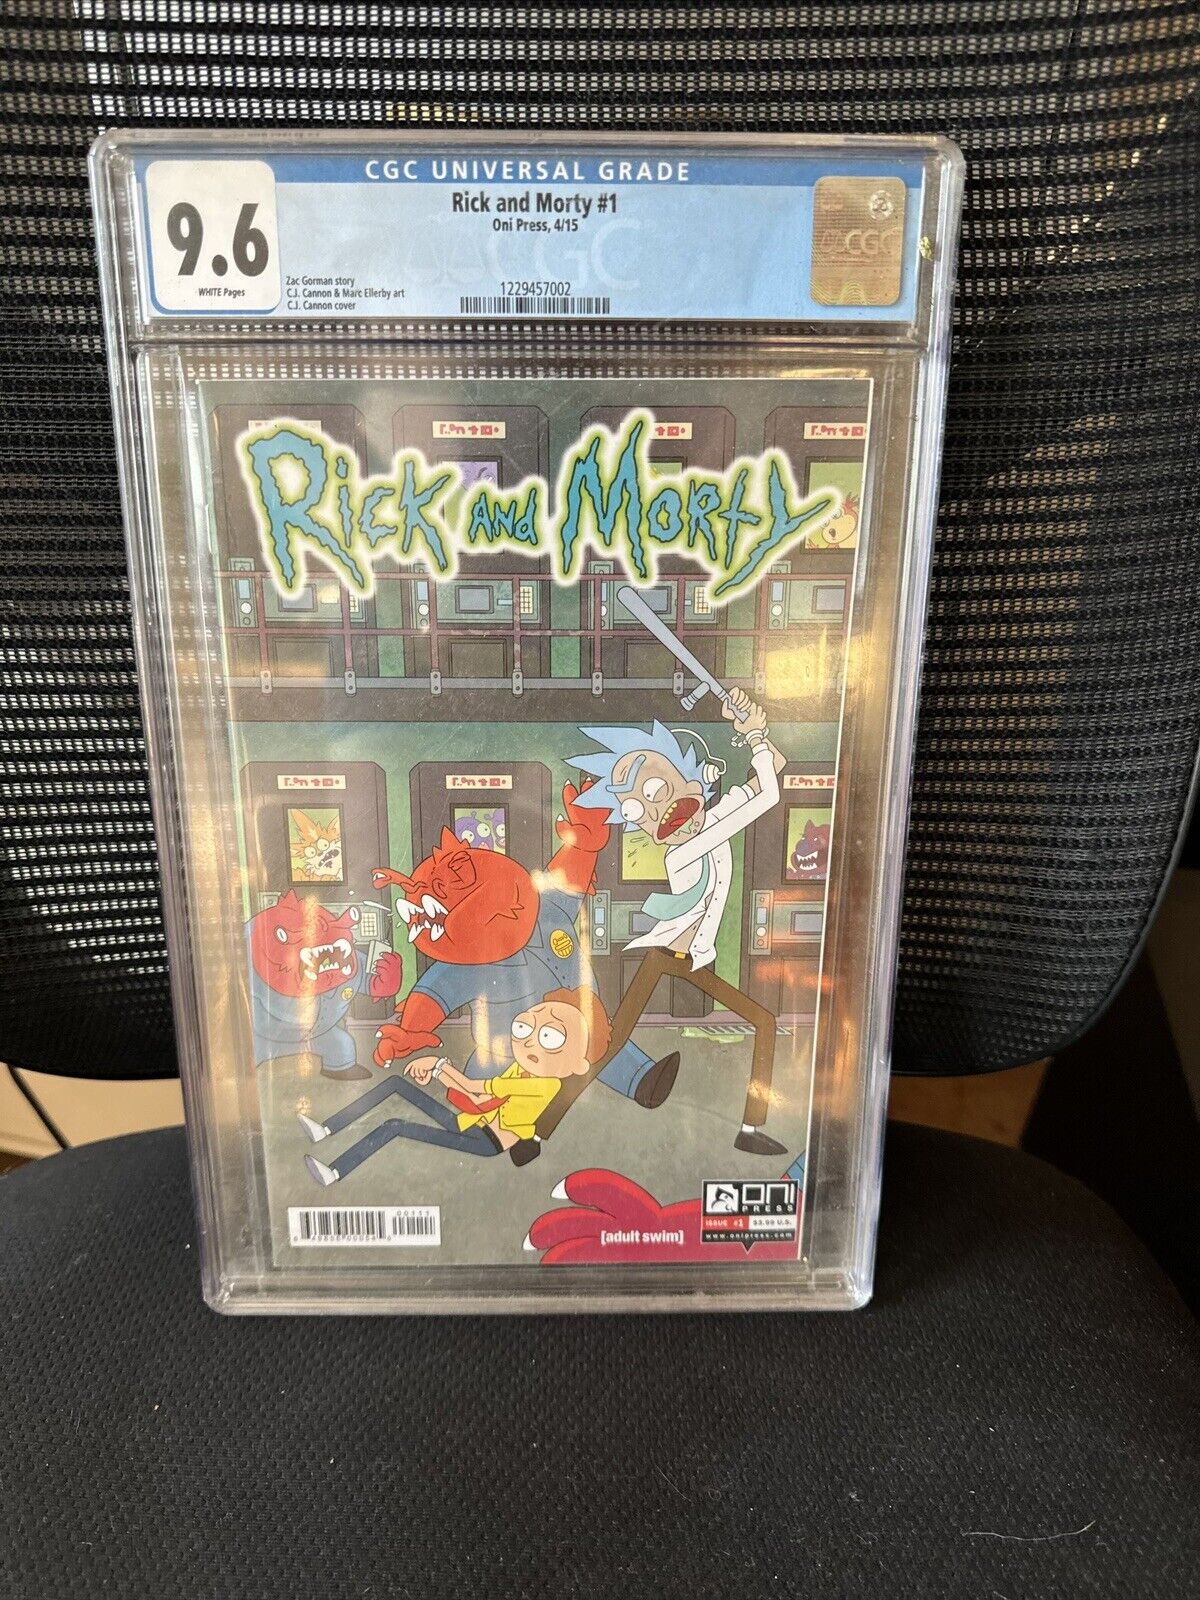 Rick and Morty #1 - First Print - CGC 9.6 - 2120664001